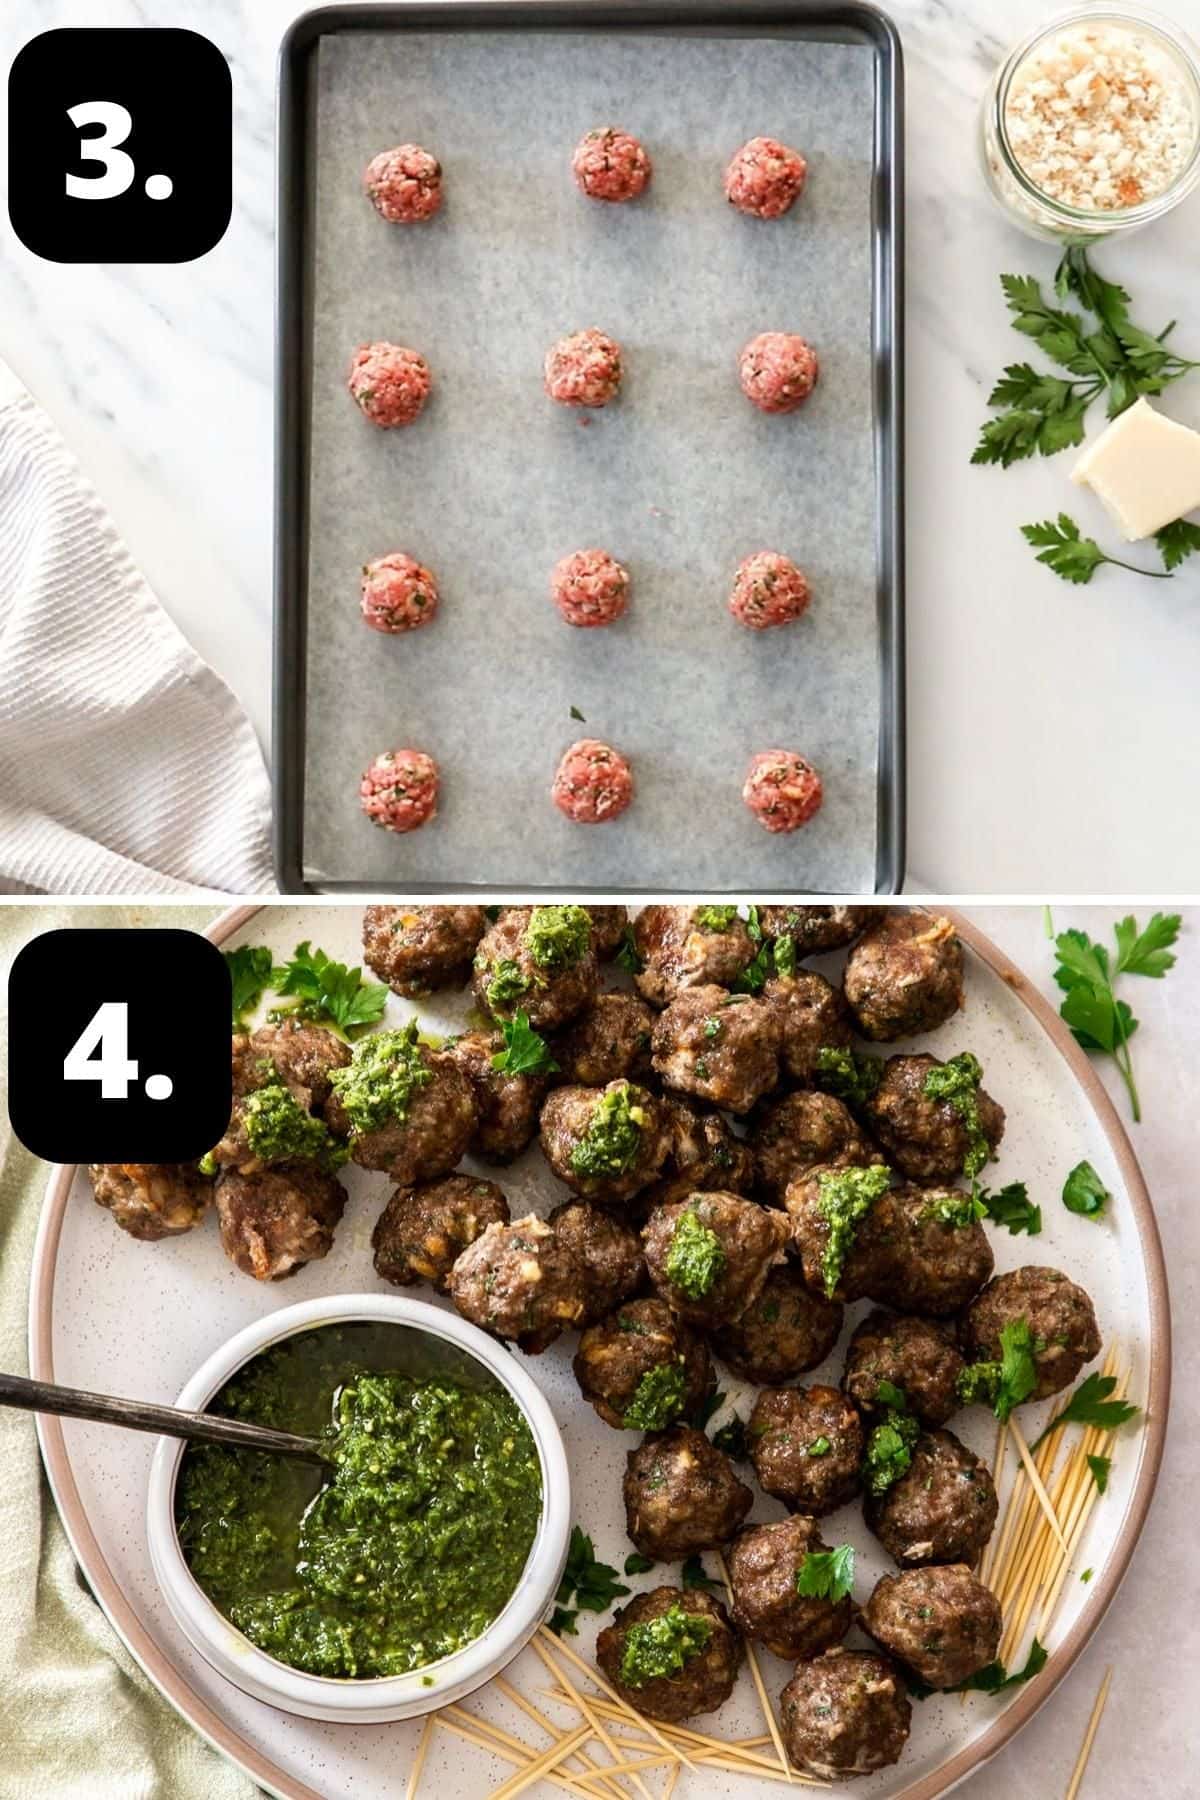 Steps 3-4 of preparing this recipe - the meatballs rolled on a baking tray ready to be cooked and the cooked meatballs ready to serve.